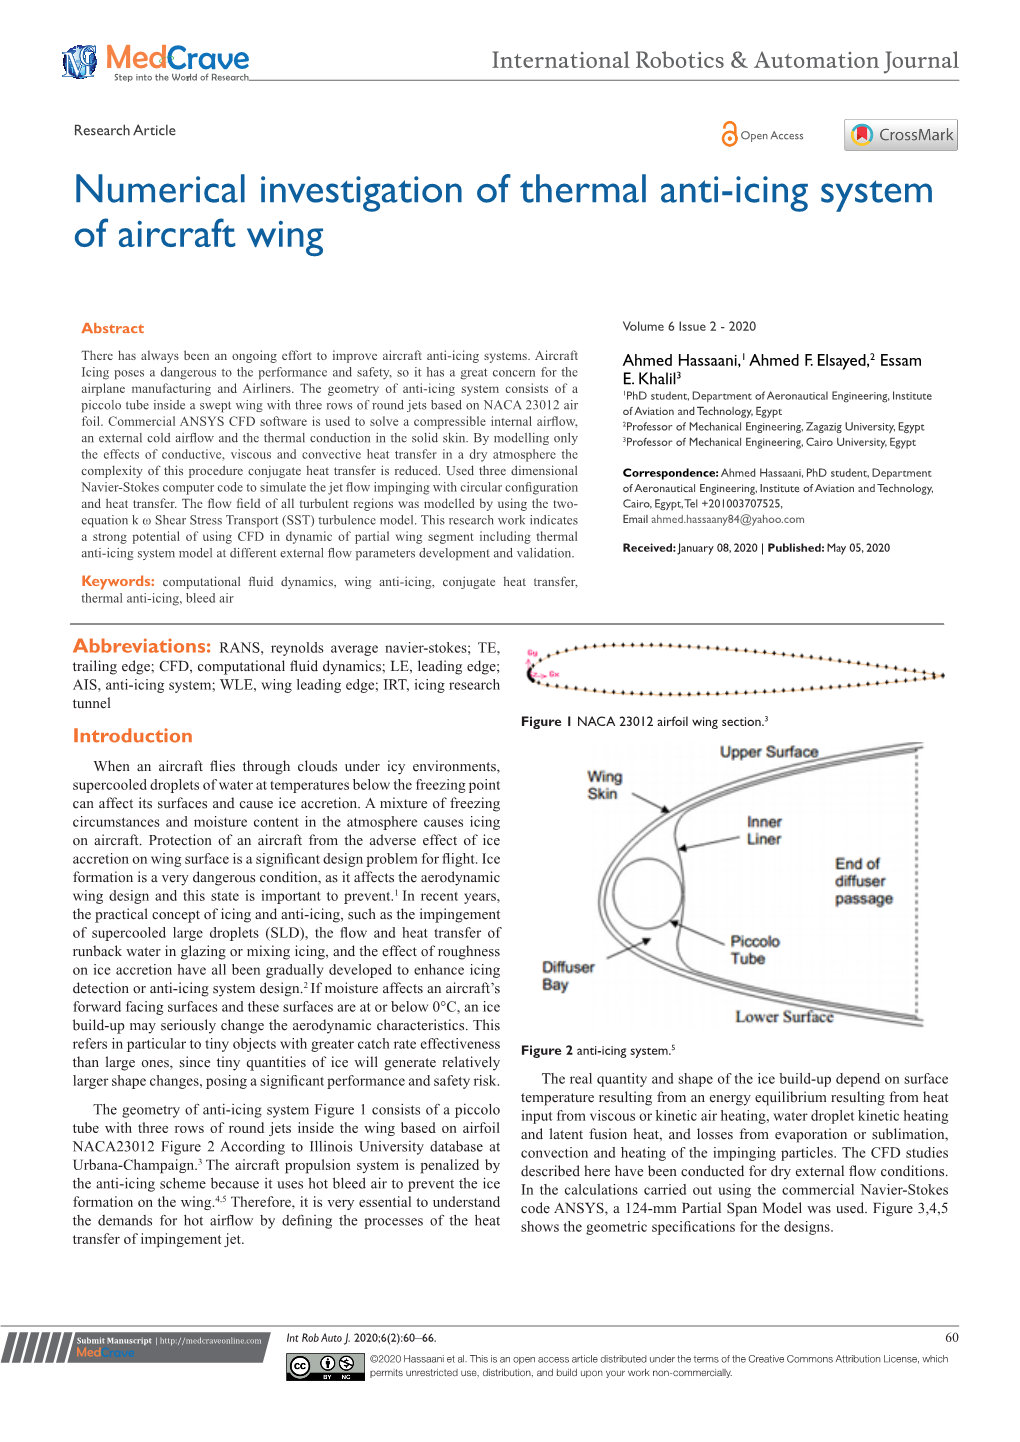 Numerical Investigation of Thermal Anti-Icing System of Aircraft Wing